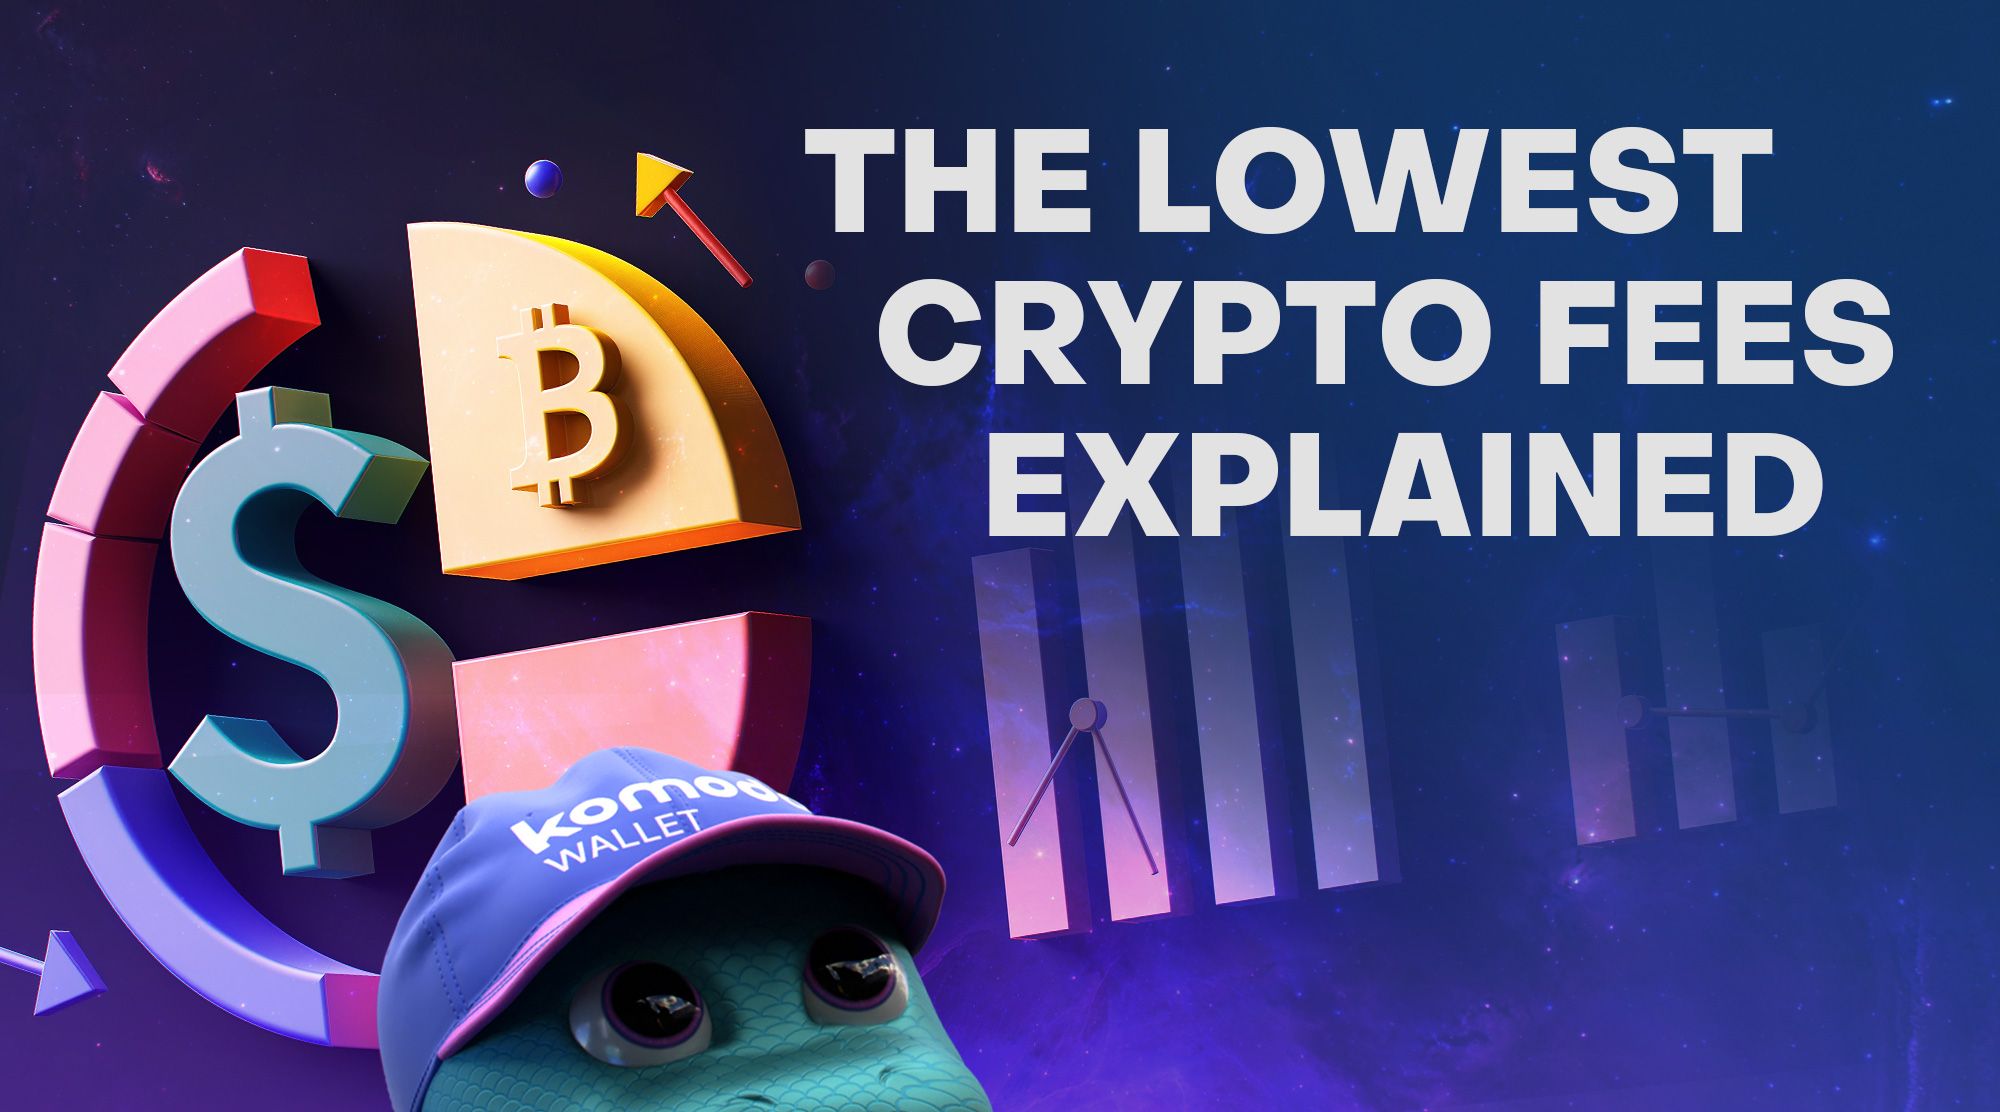 The Lowest Crypto Fees Explained